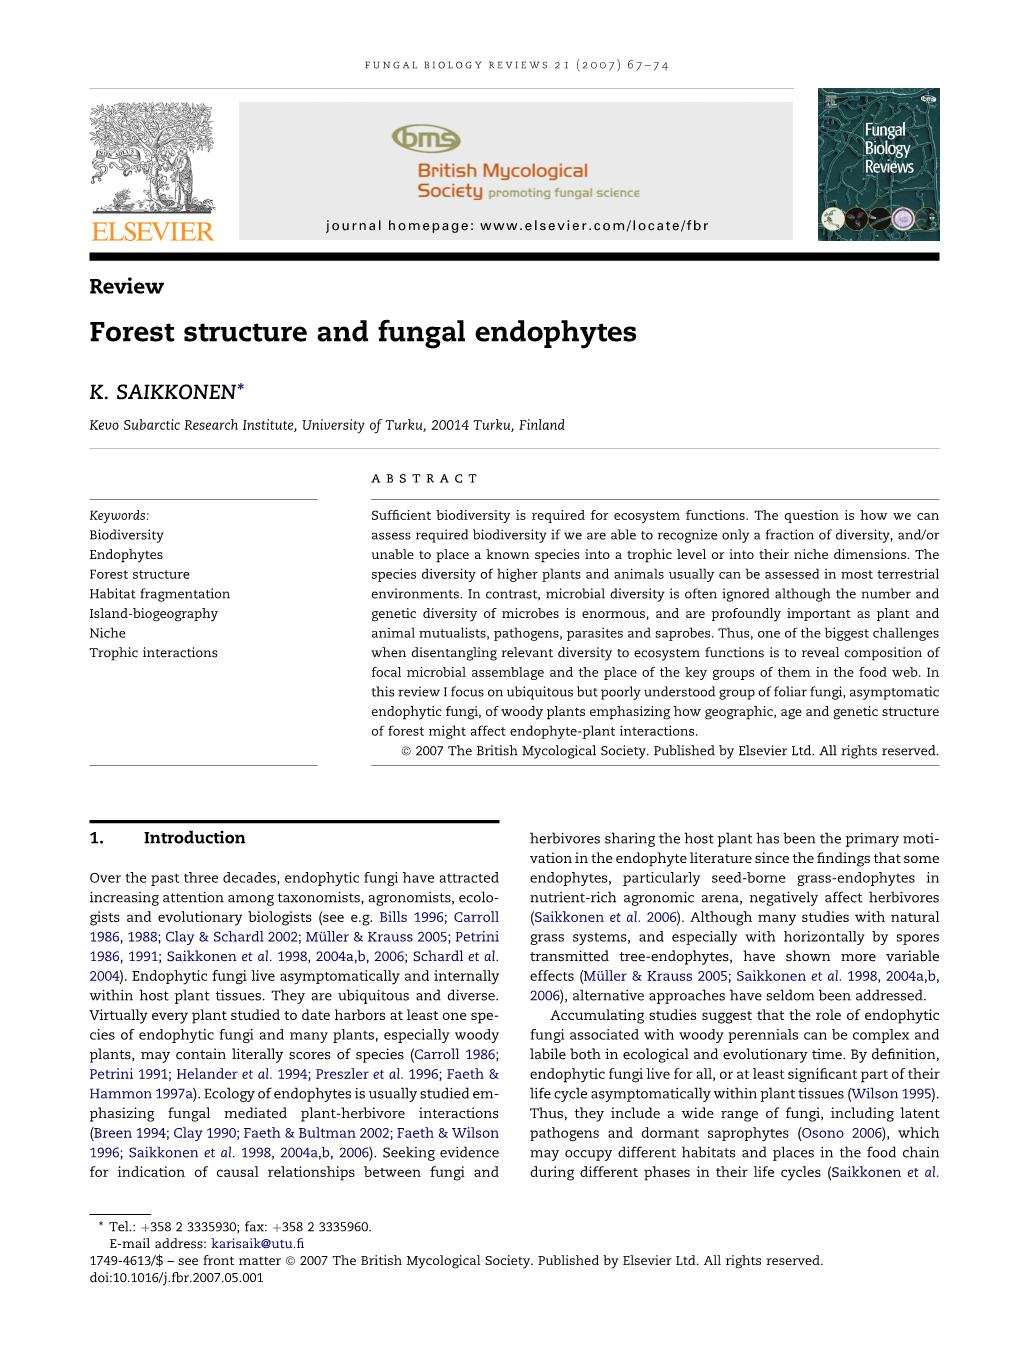 Forest Structure and Fungal Endophytes